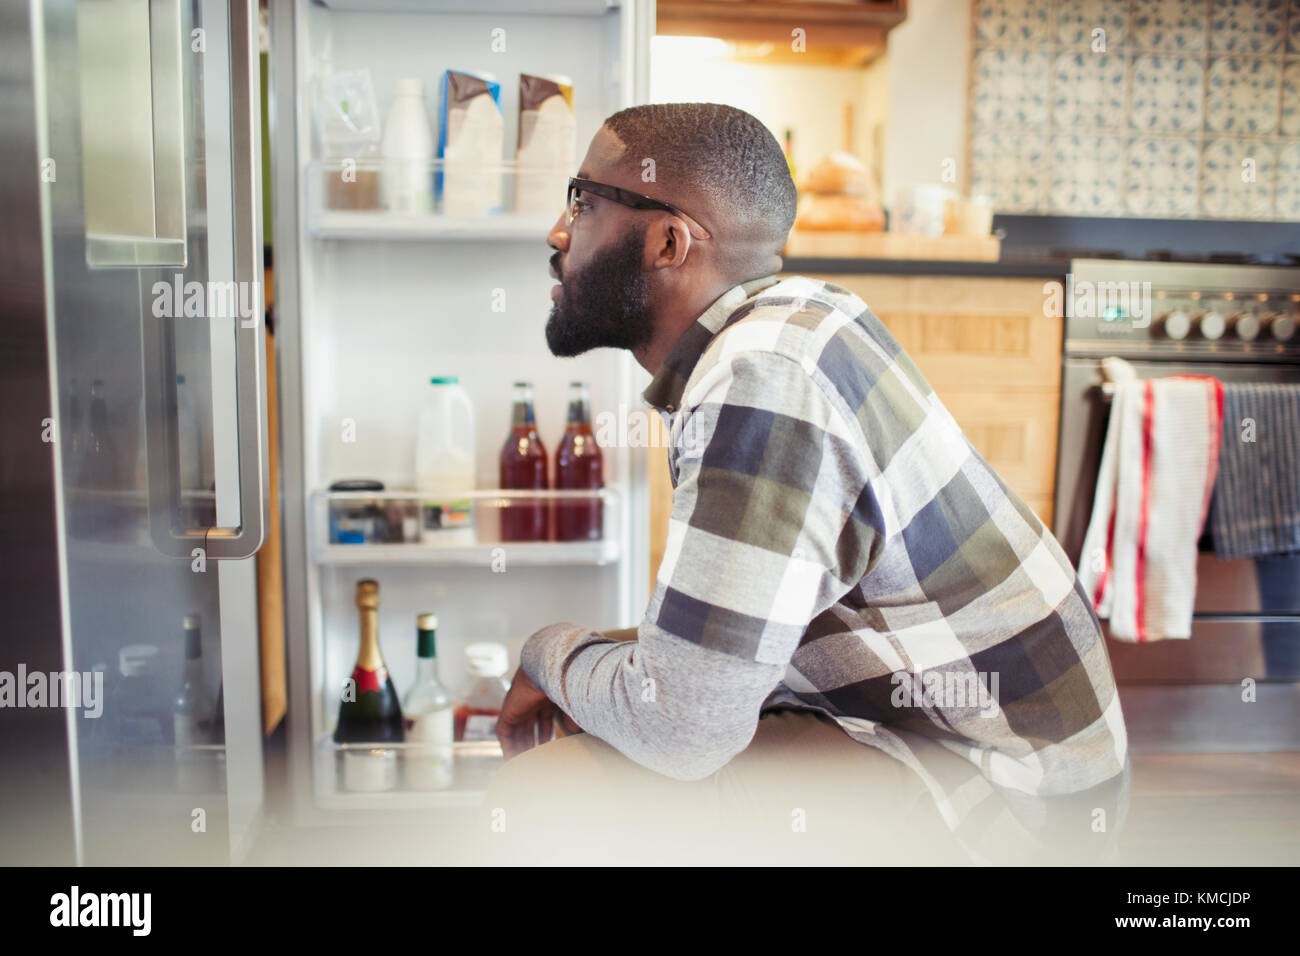 Hungry man peering into refrigerator in kitchen Stock Photo